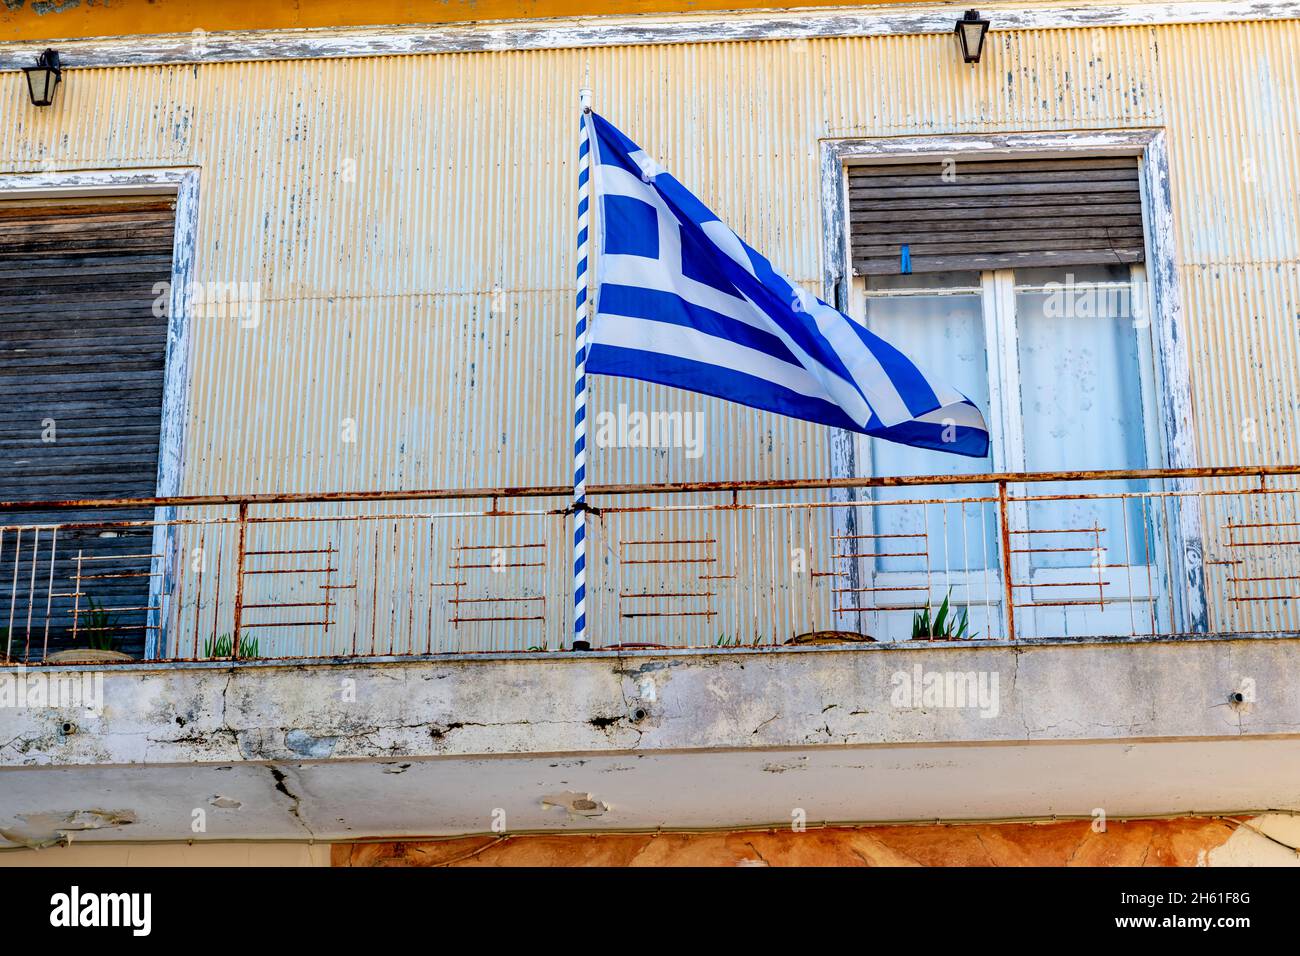 The Greek national Flag flying on the balcony of a building during the Oxi Day anniversary celebration in Lefkada, Greece. Stock Photo